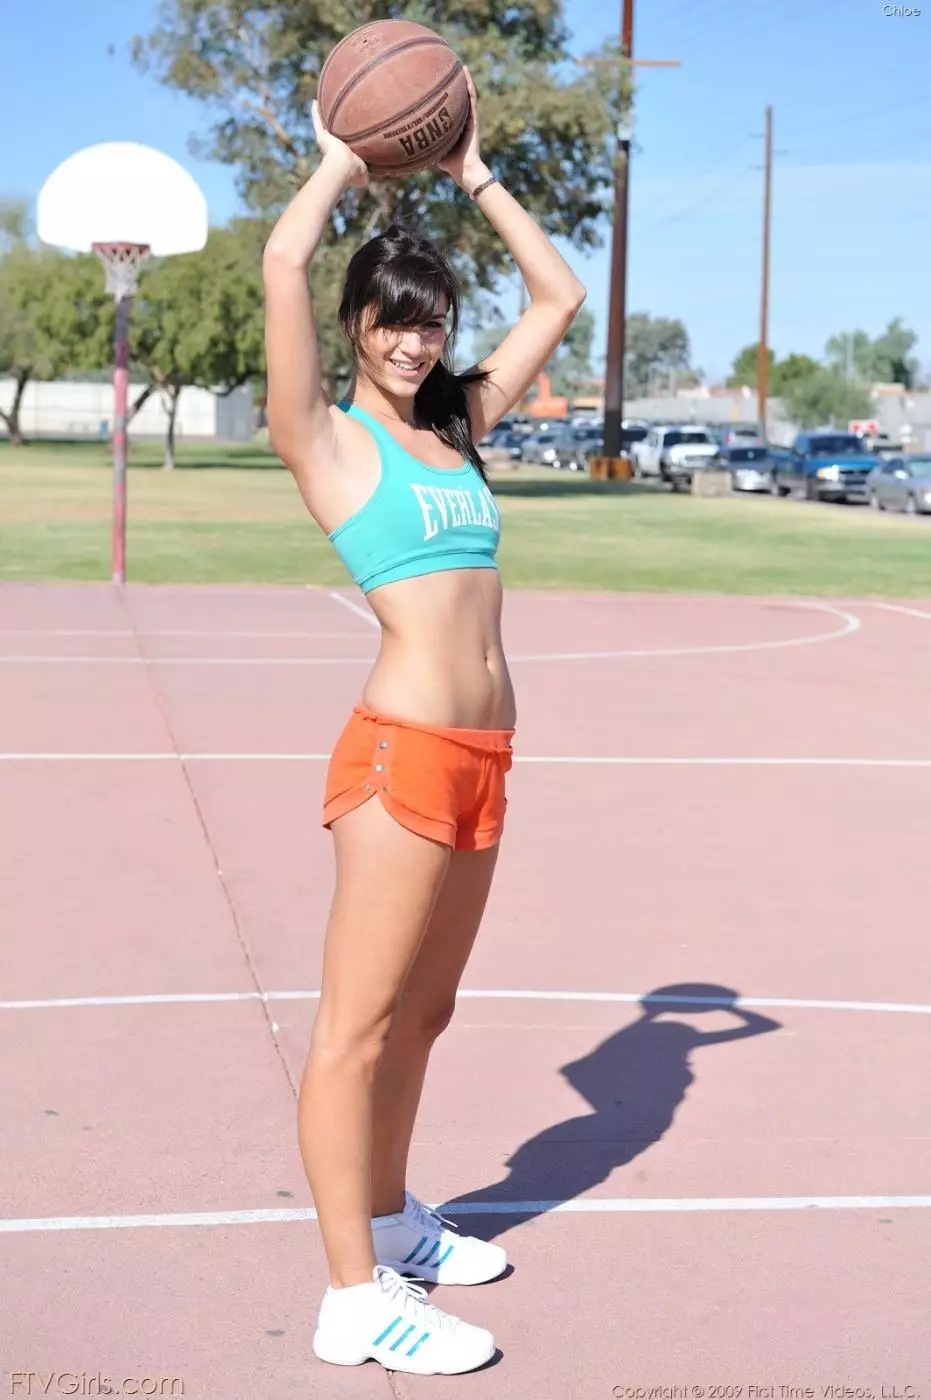 After playing basket-ball bratty brunette Chloe makes a stripshow on the field